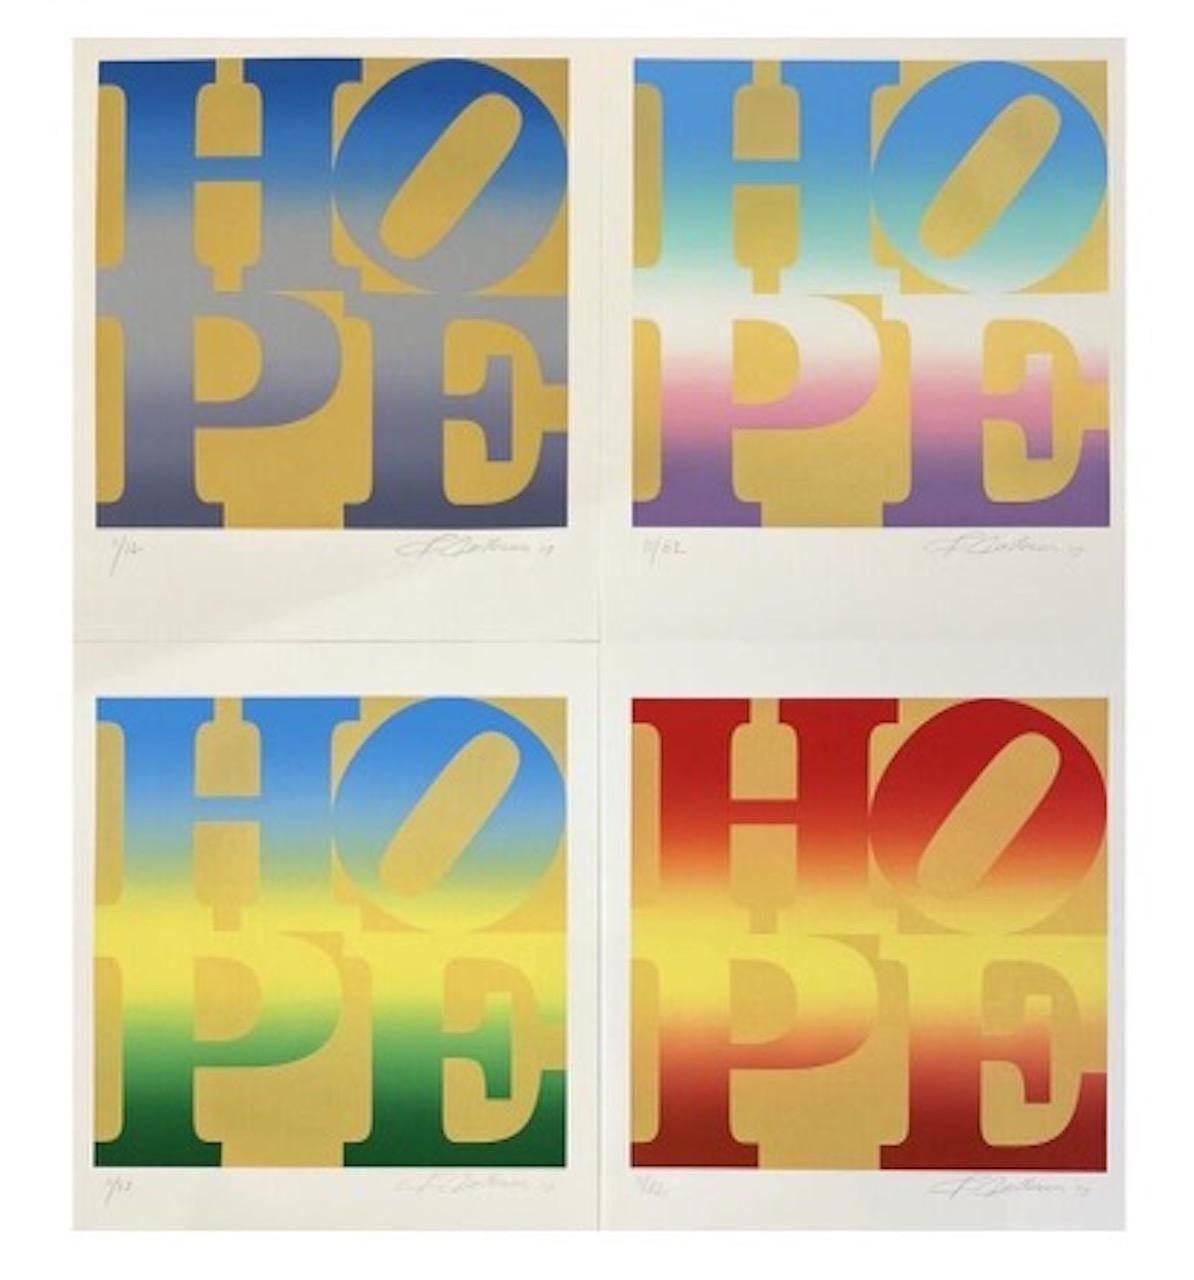 Four Seasons of HOPE, The complete portfolio of 4 prints, Gold Edition